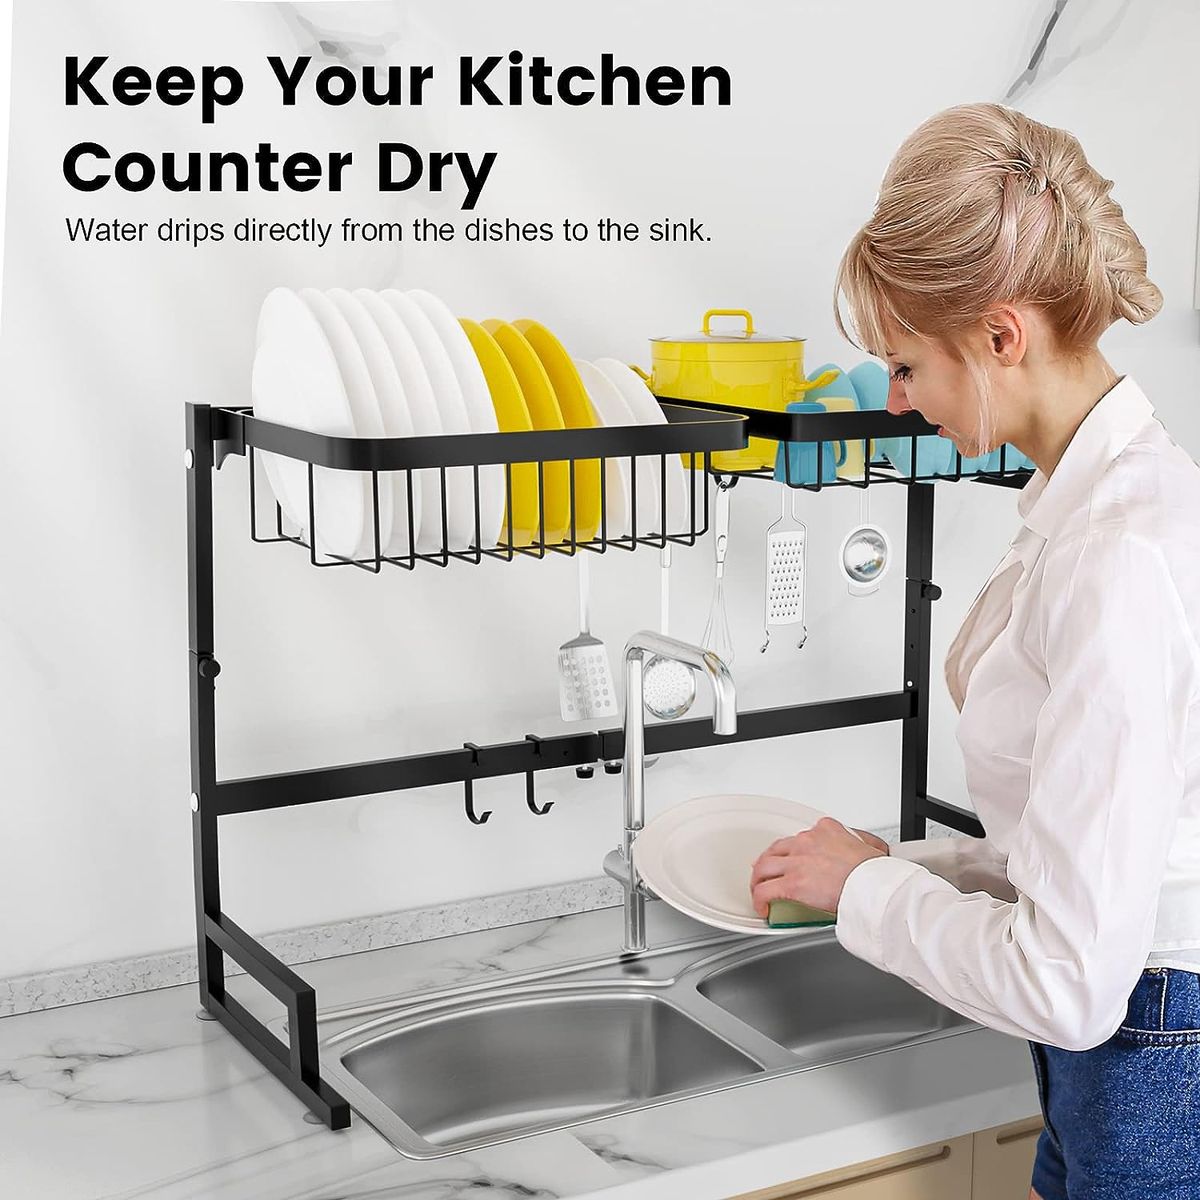 MERRYBOX Over The Sink Dish Drying Rack - MERRYBOX 2-Tier Dish Drying Rack  Over Sink Adjustable Length(25.6-33.5in), Stainless Steel Dish Drainer, Dishes  Rack Kitchen Storage Organizer Space Saver